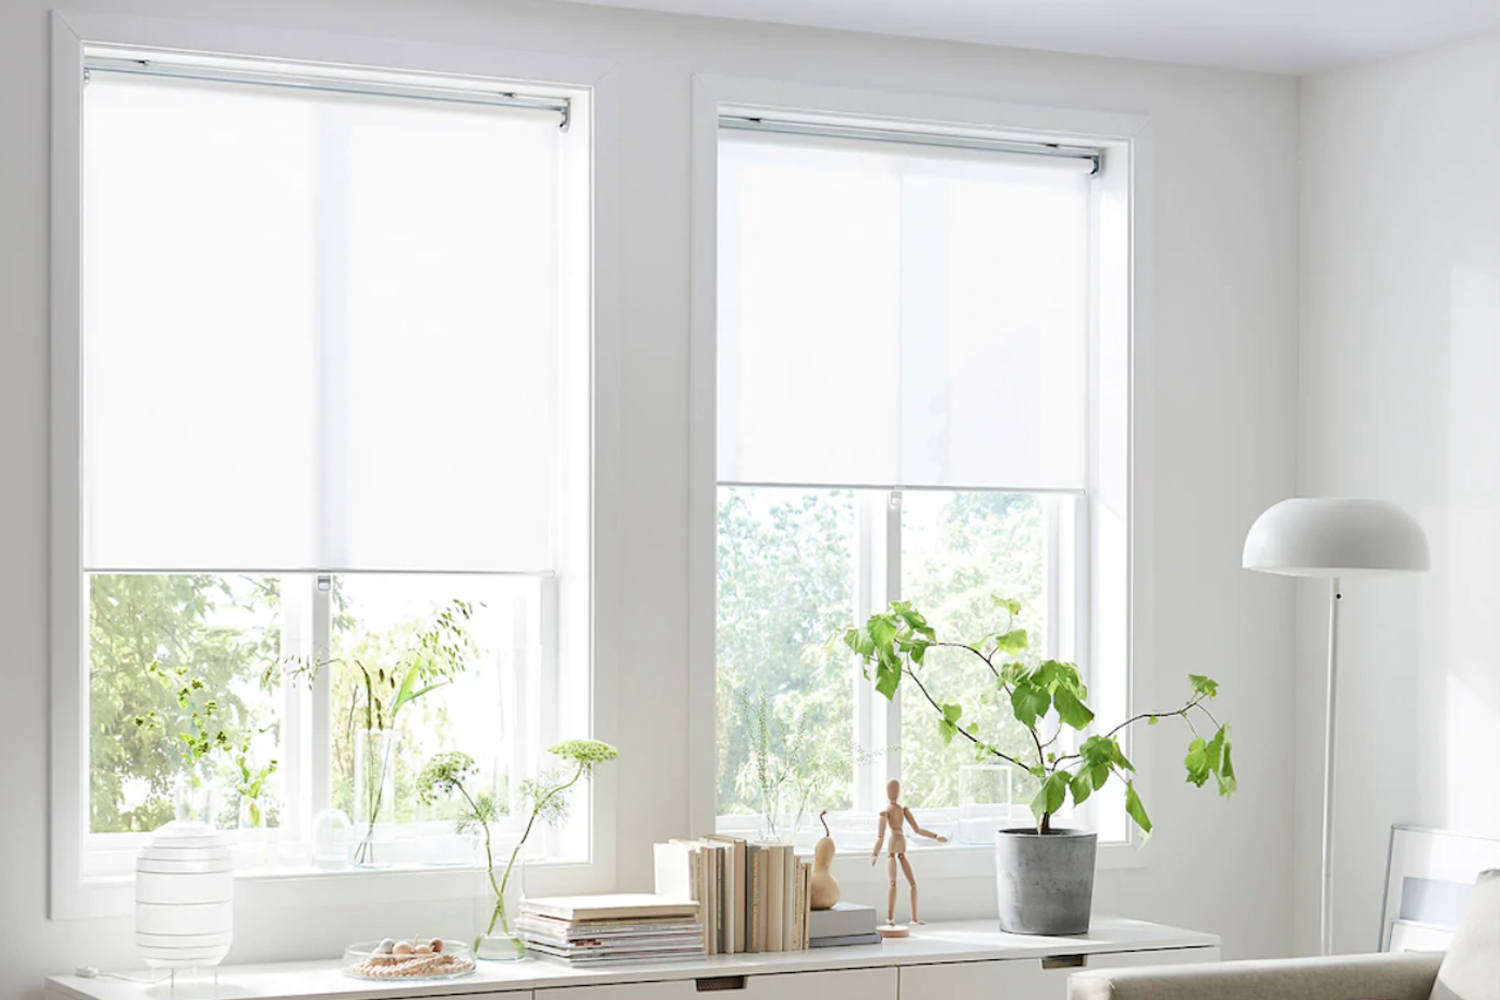 Our Brand Ox Lyon Light Filtering Roller Shade